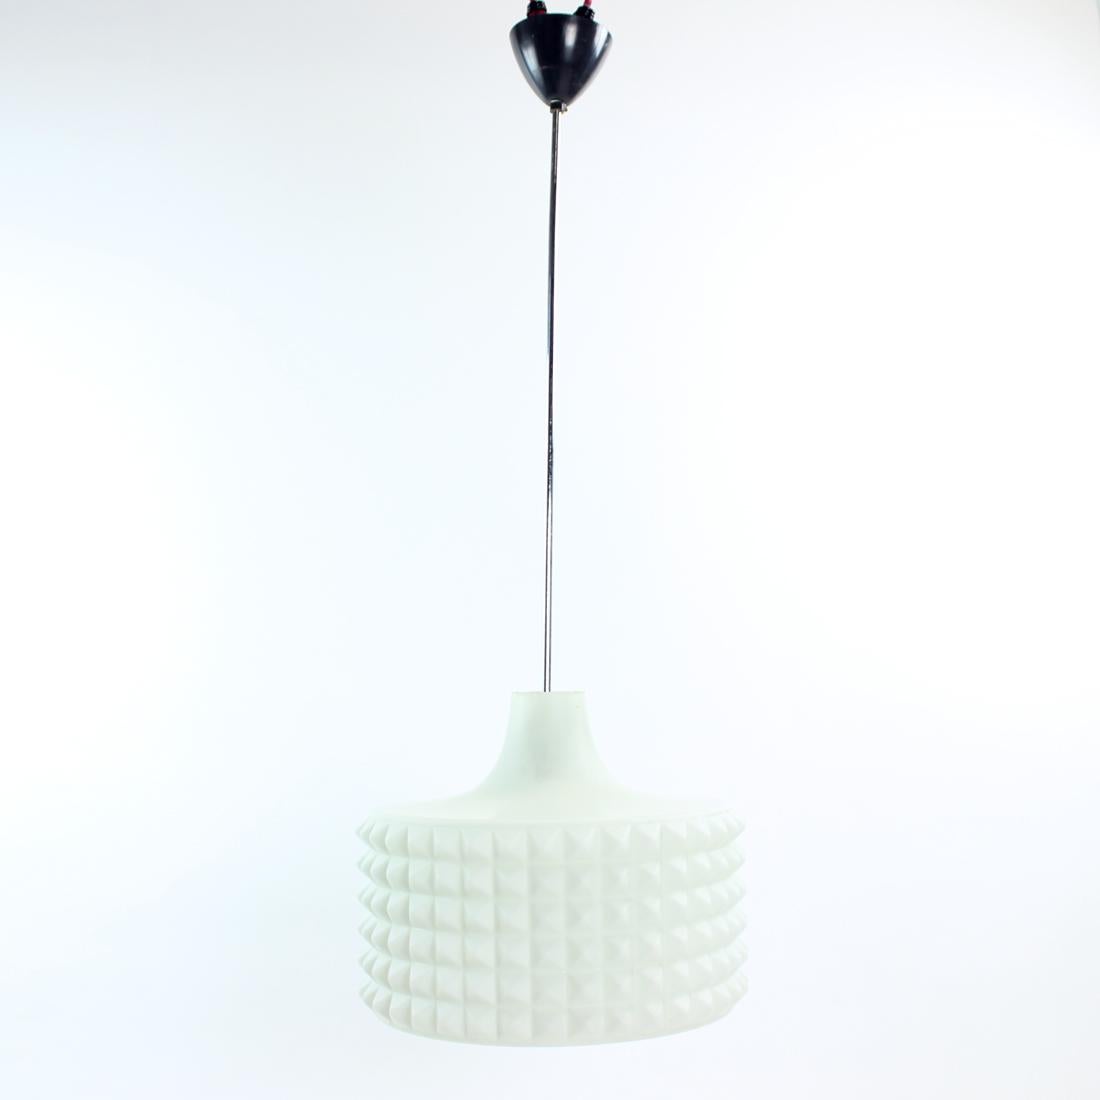 This is a beautiful, tall pendant produced by Napako company in Czechoslovakia in 1960s. The pendant design is elegant and clean with typical Mid-century design on the white glass shield. The shield shows beautiful details and is simply made of pure